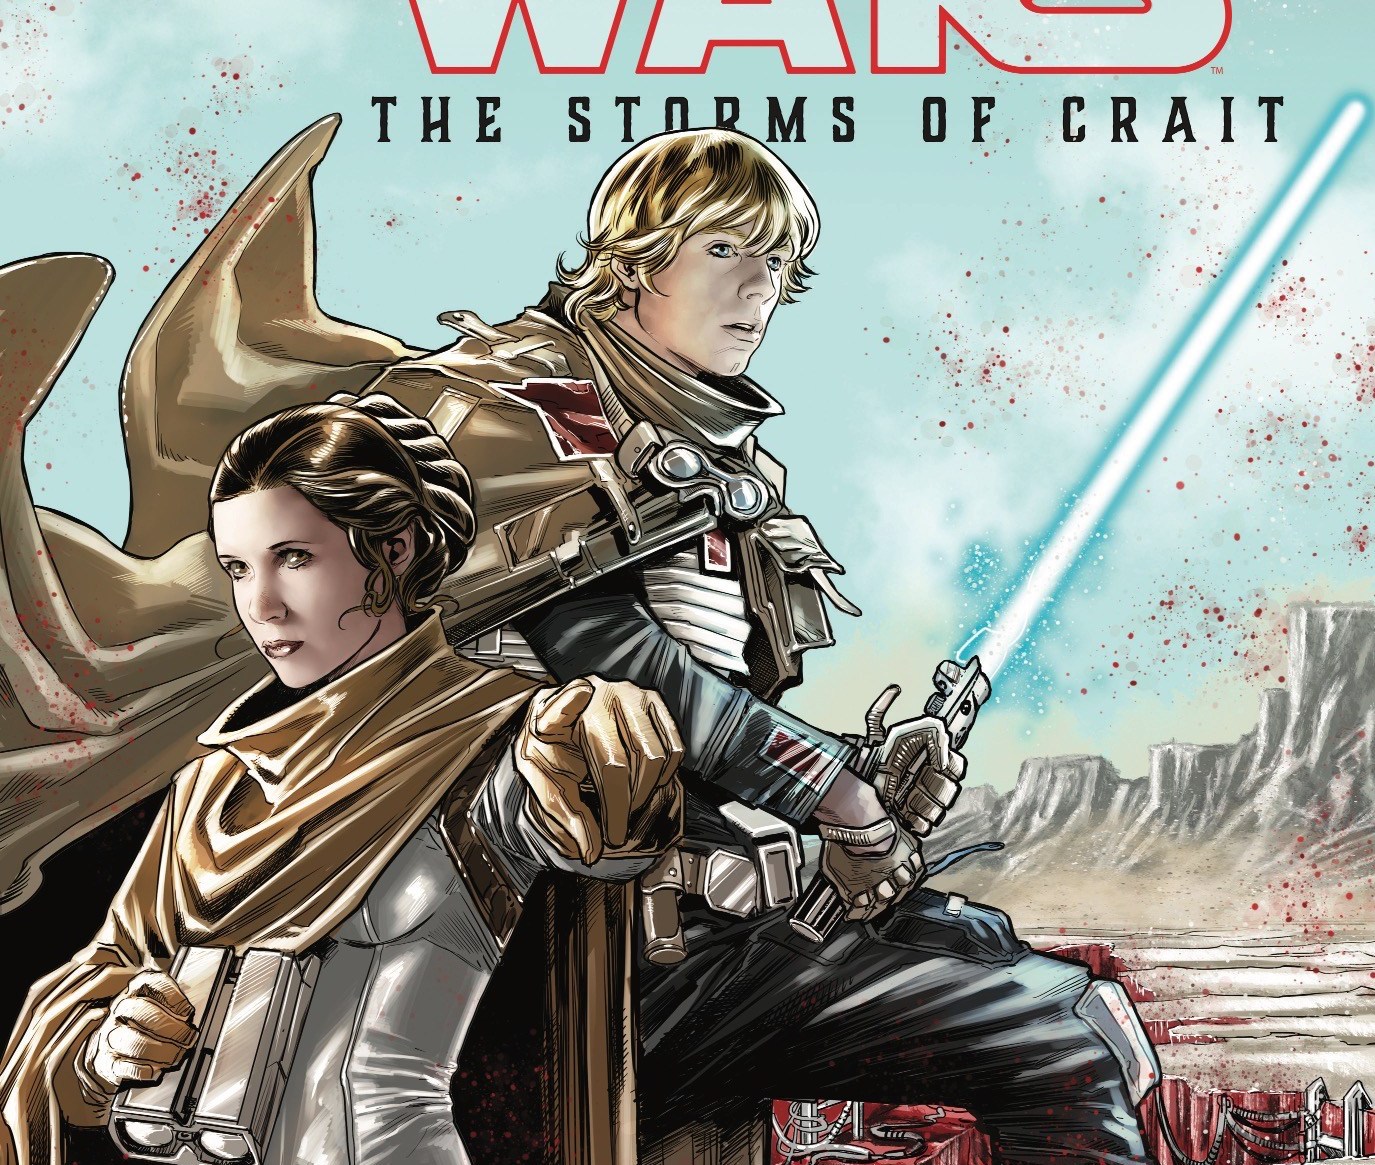 Star Wars: The Storms of Crait #1 Review